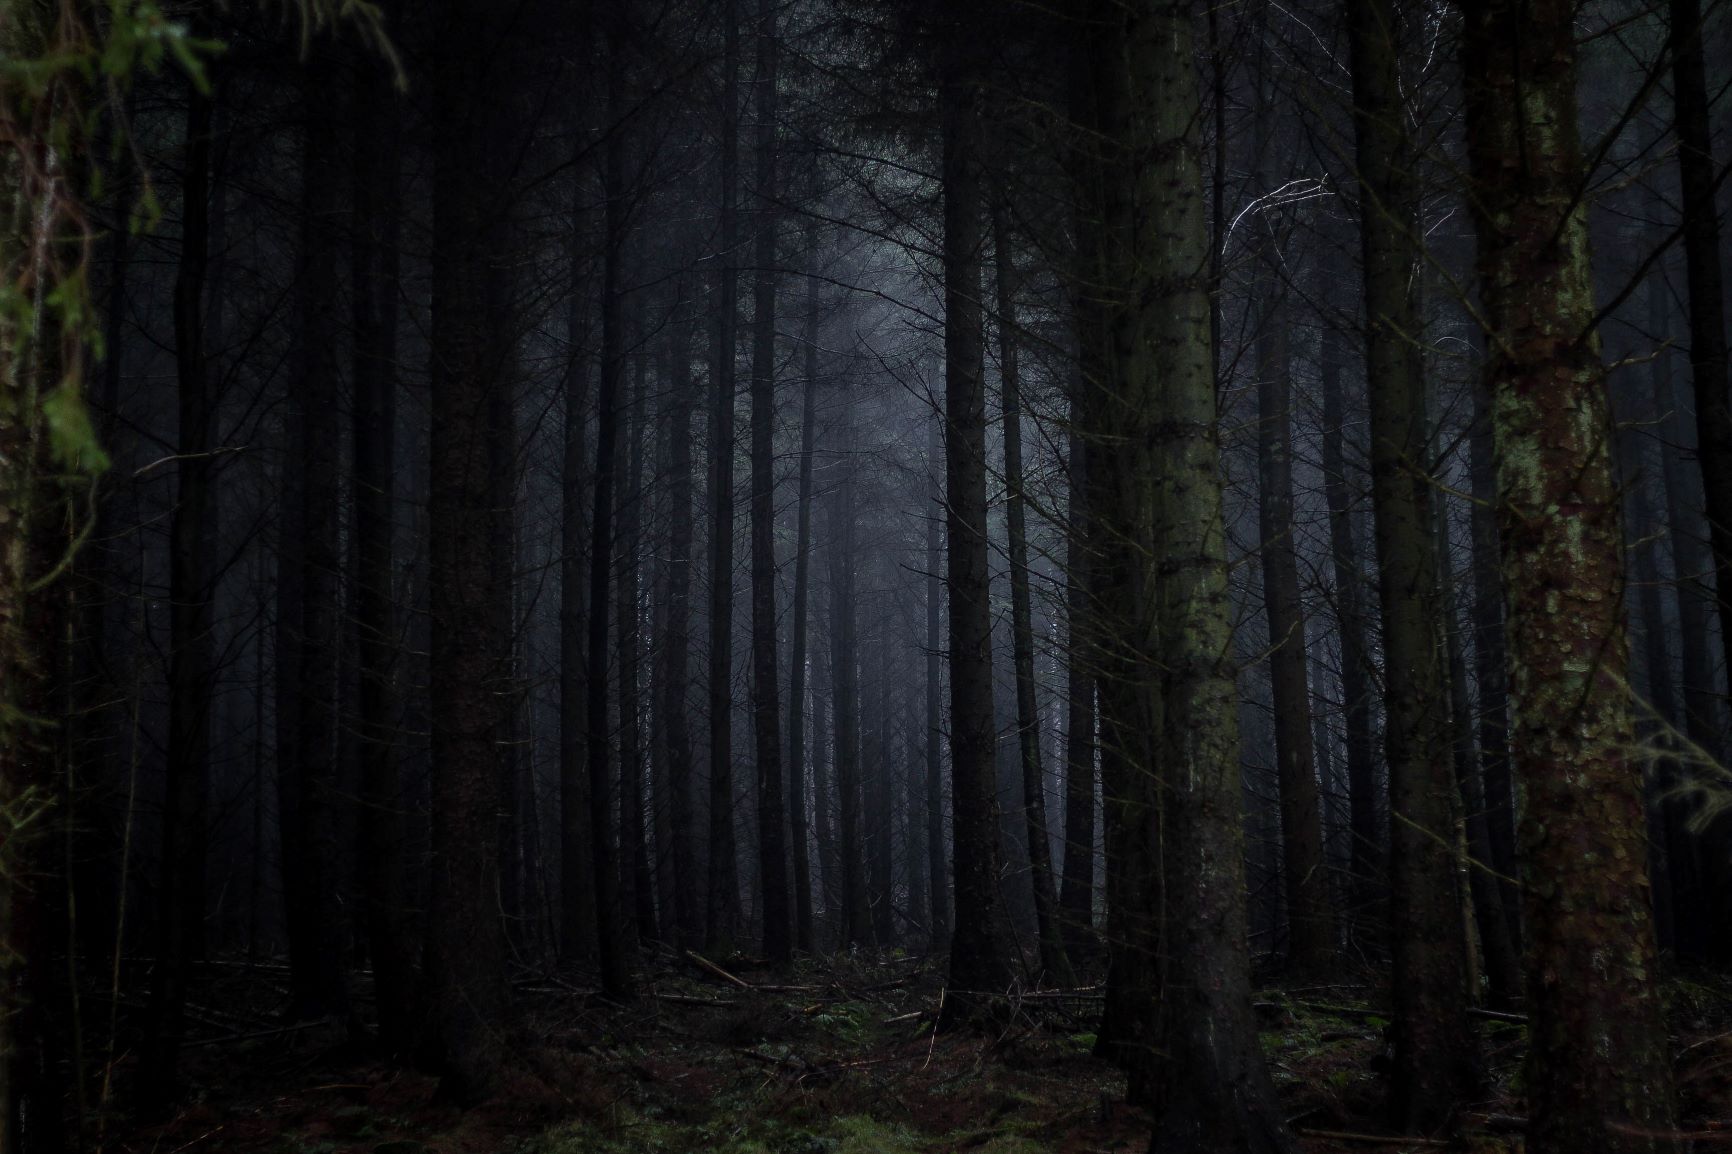 Dark trees in a forest at night